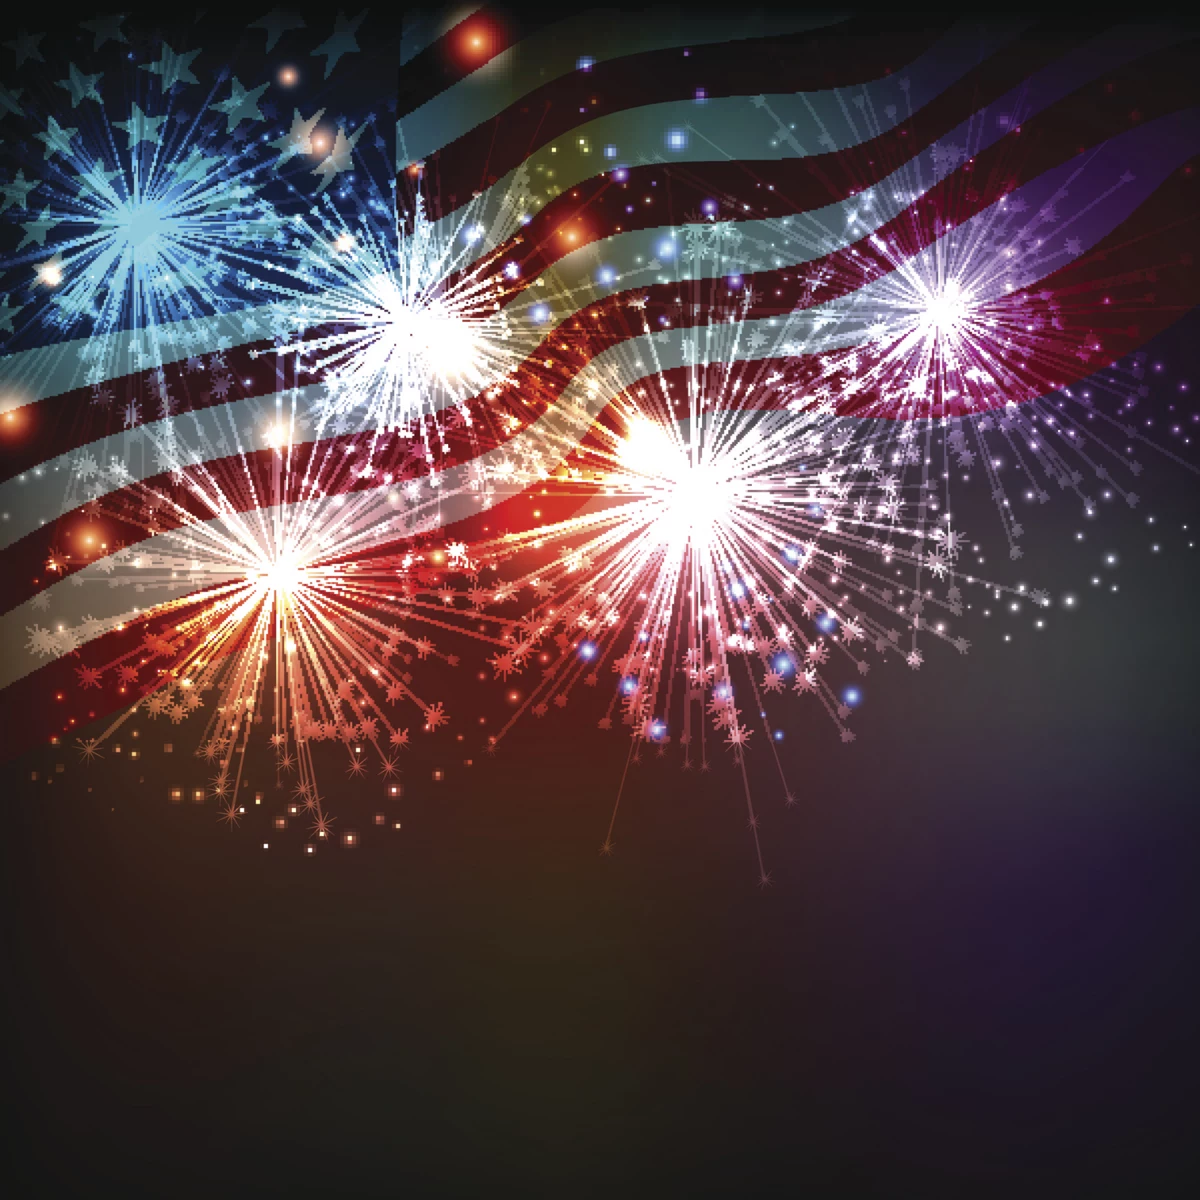 Find Fireworks Shows in Omaha for 4th of July and Year-Round